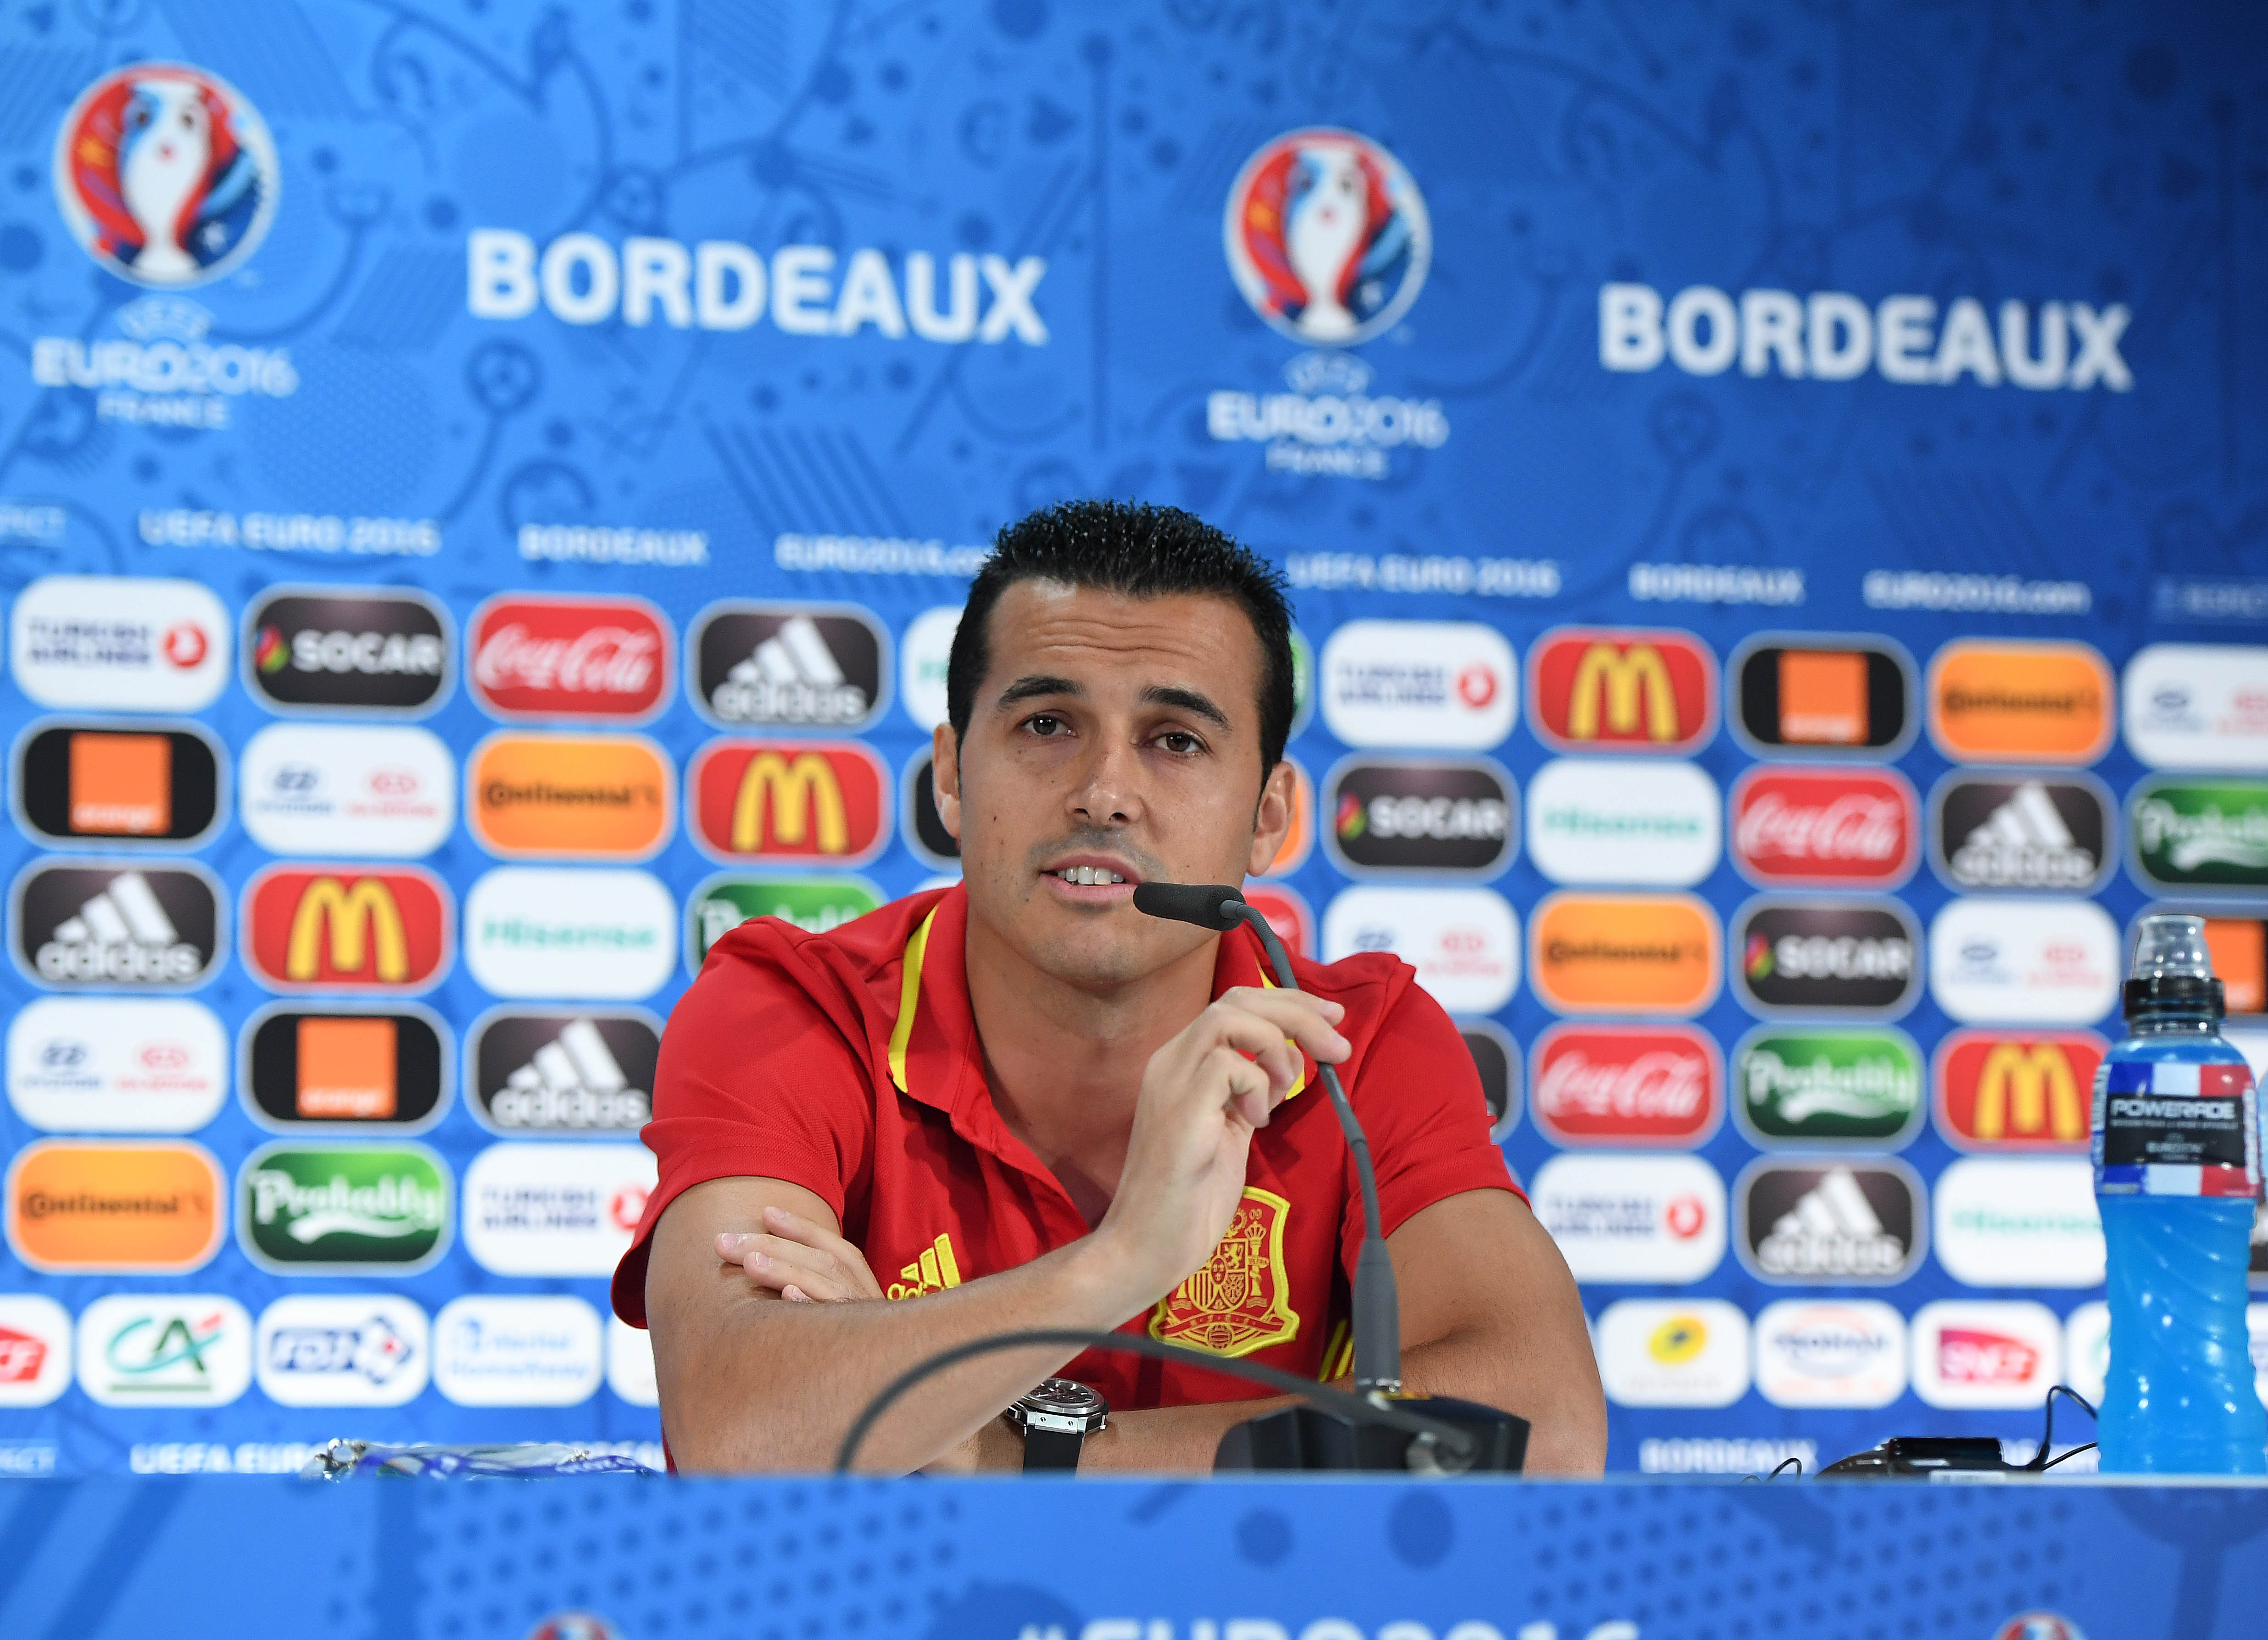 BORDEAUX, FRANCE - JUNE 20: In this handout image provided by UEFA, Pedro of Spain answers questions from the media during a press conferencev on June 20, 2016 in Bordeaux, France. (Photo by Handout/UEFA via Getty Images)